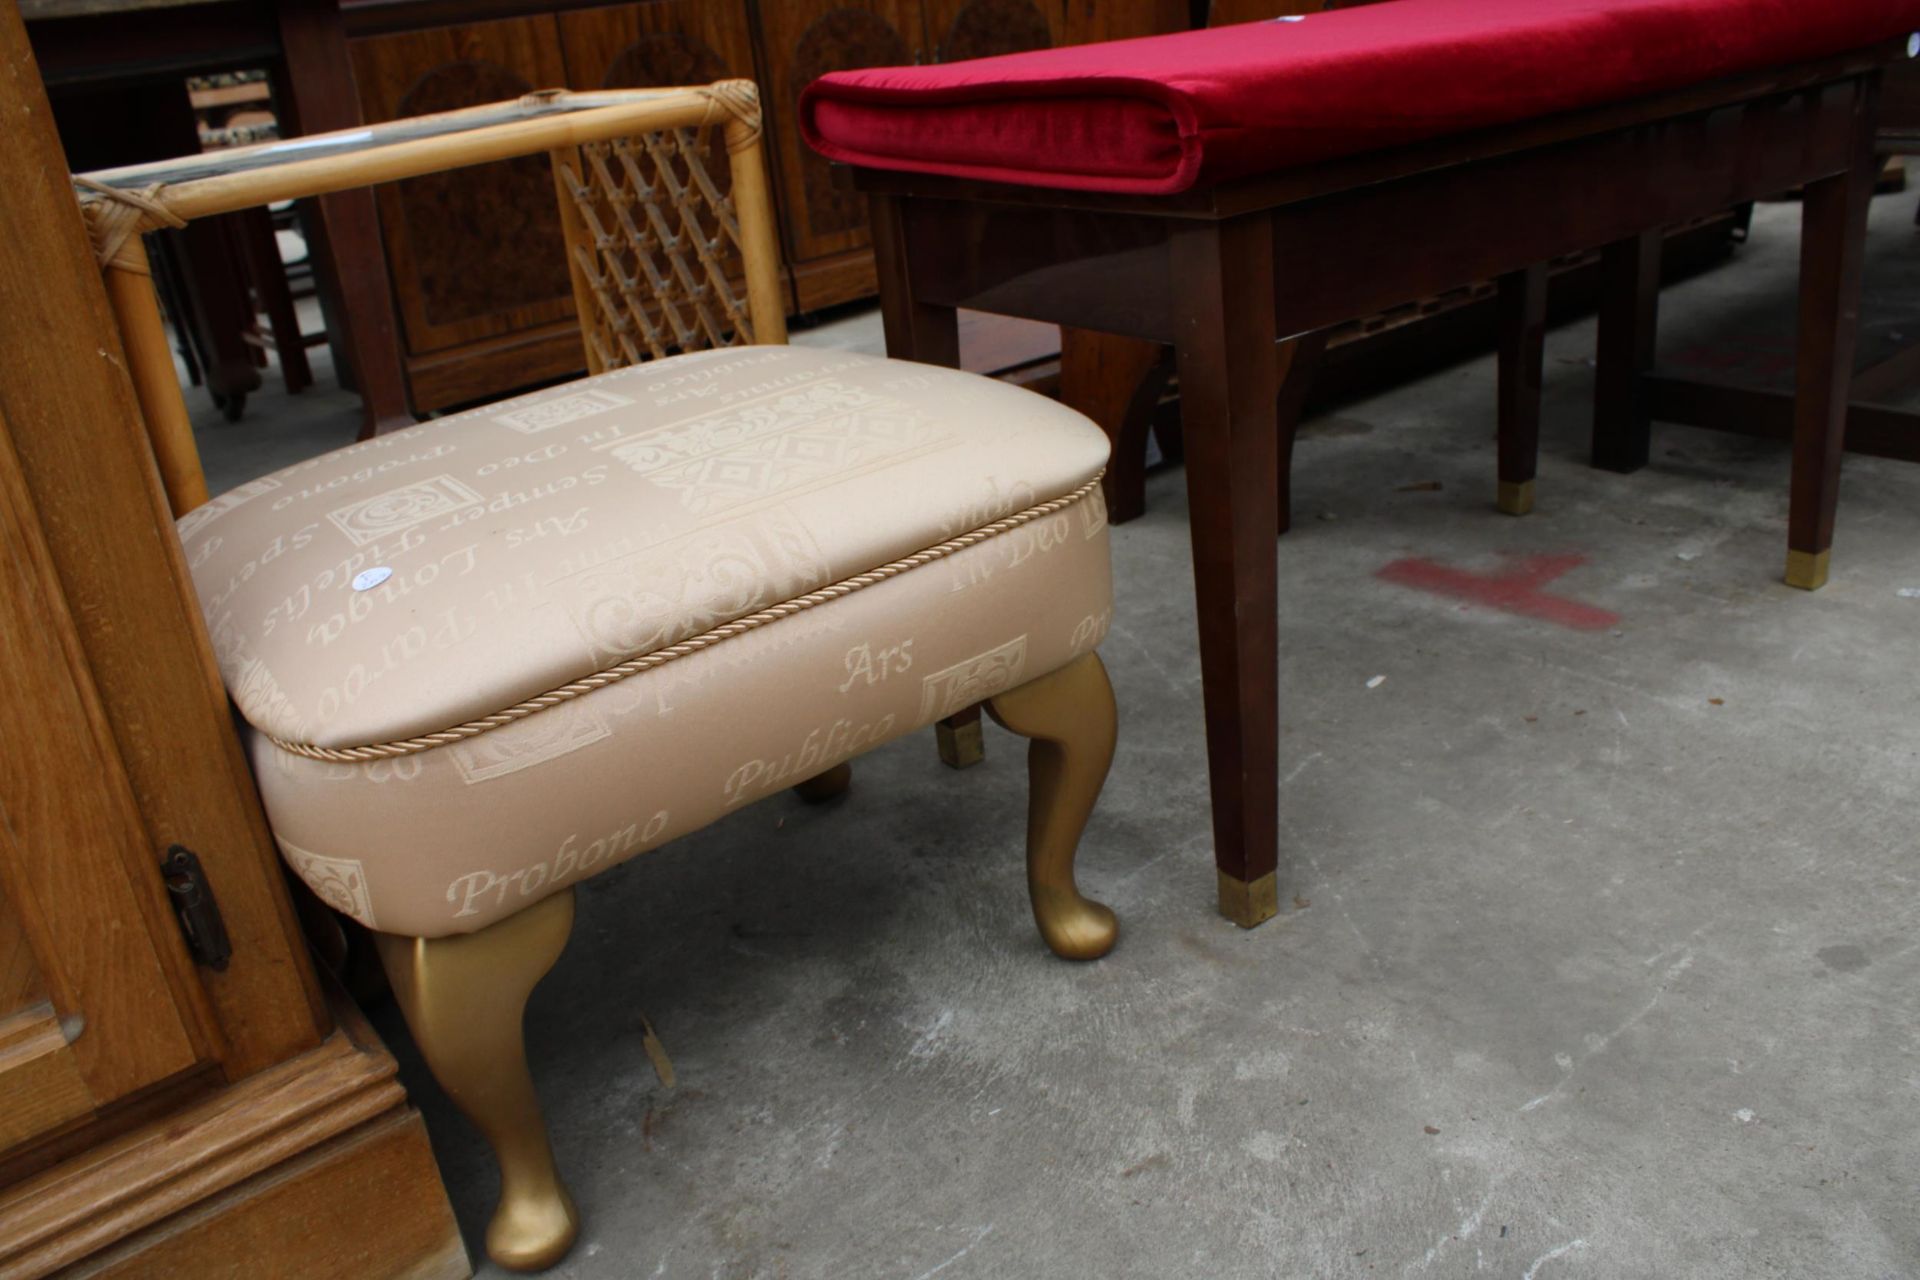 A DUET STOOL WITH LIFT UP SEAT AND A SMALL CABRIOLE LEG STOOL - Image 2 of 3